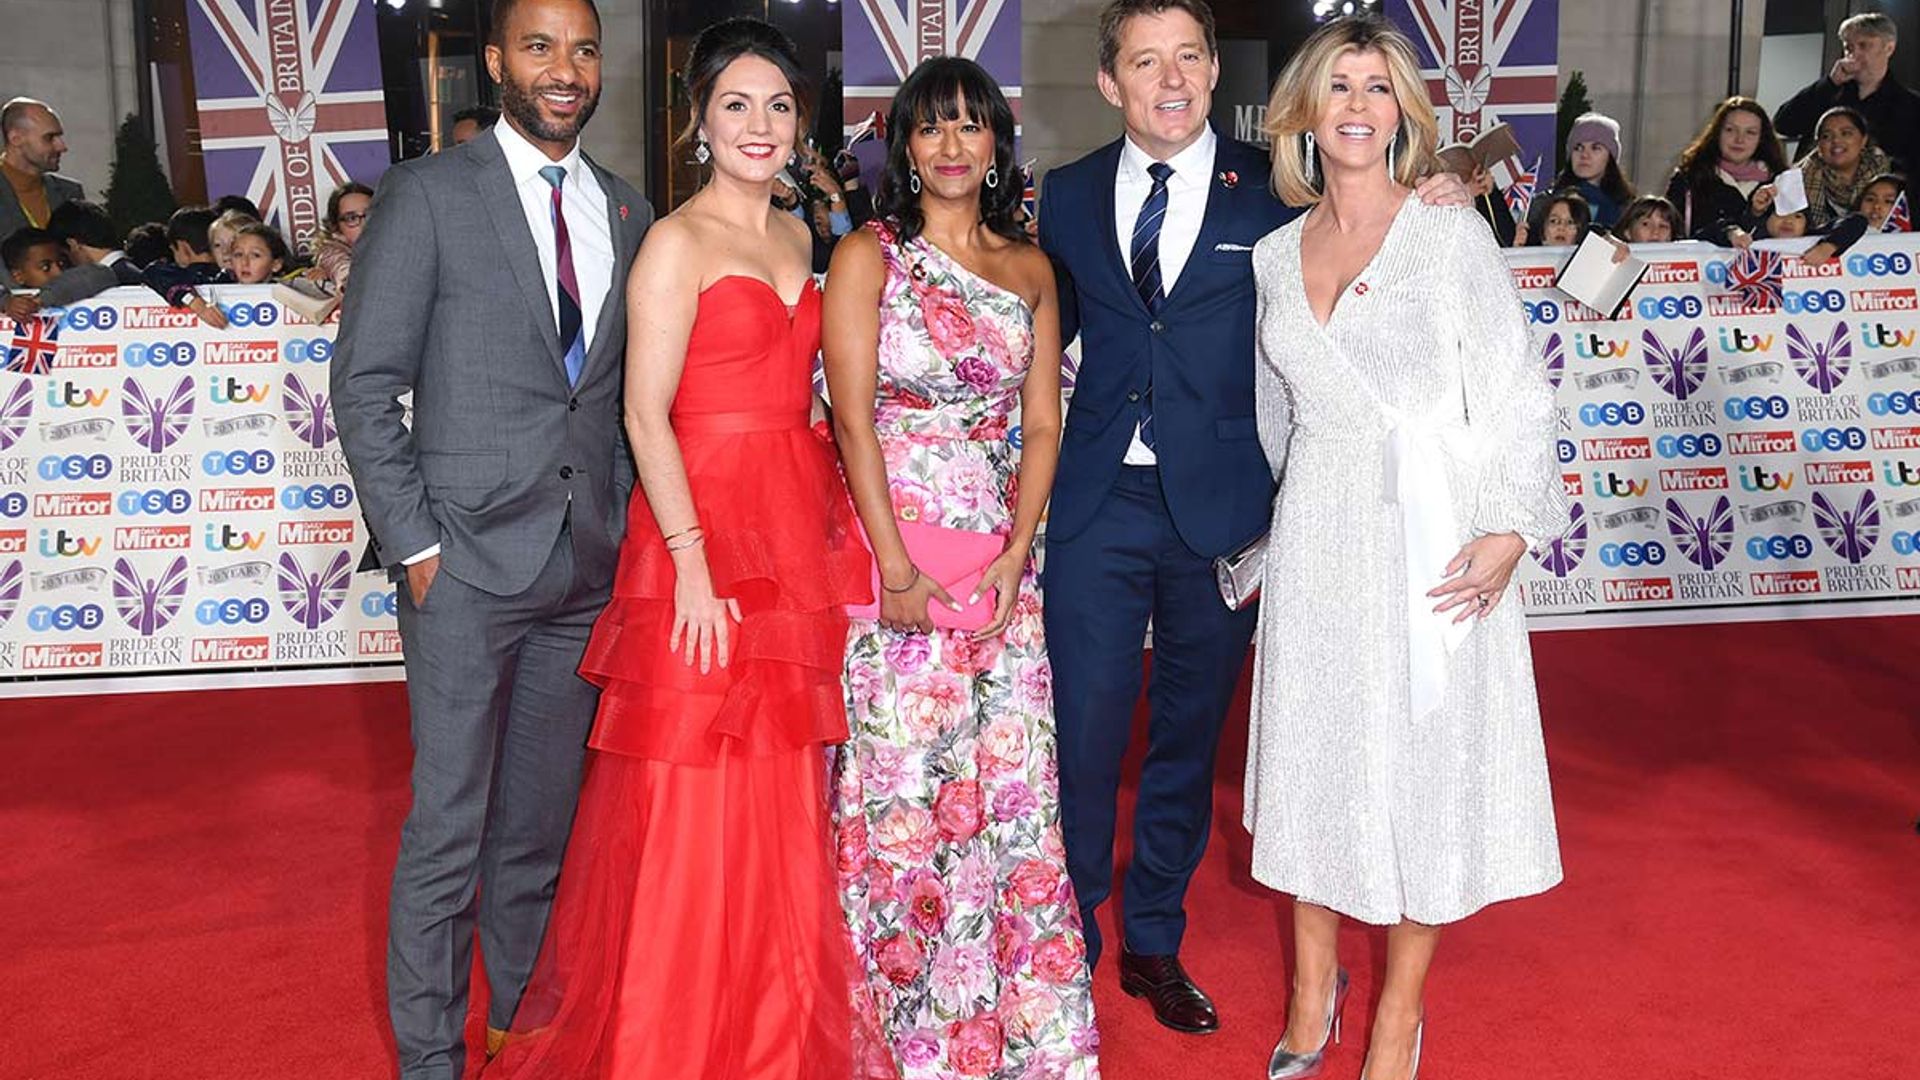 Good Morning Britain hosts wowed at the Pride of Britain Awards 2019: From Kate Garraway to Susanna Reid